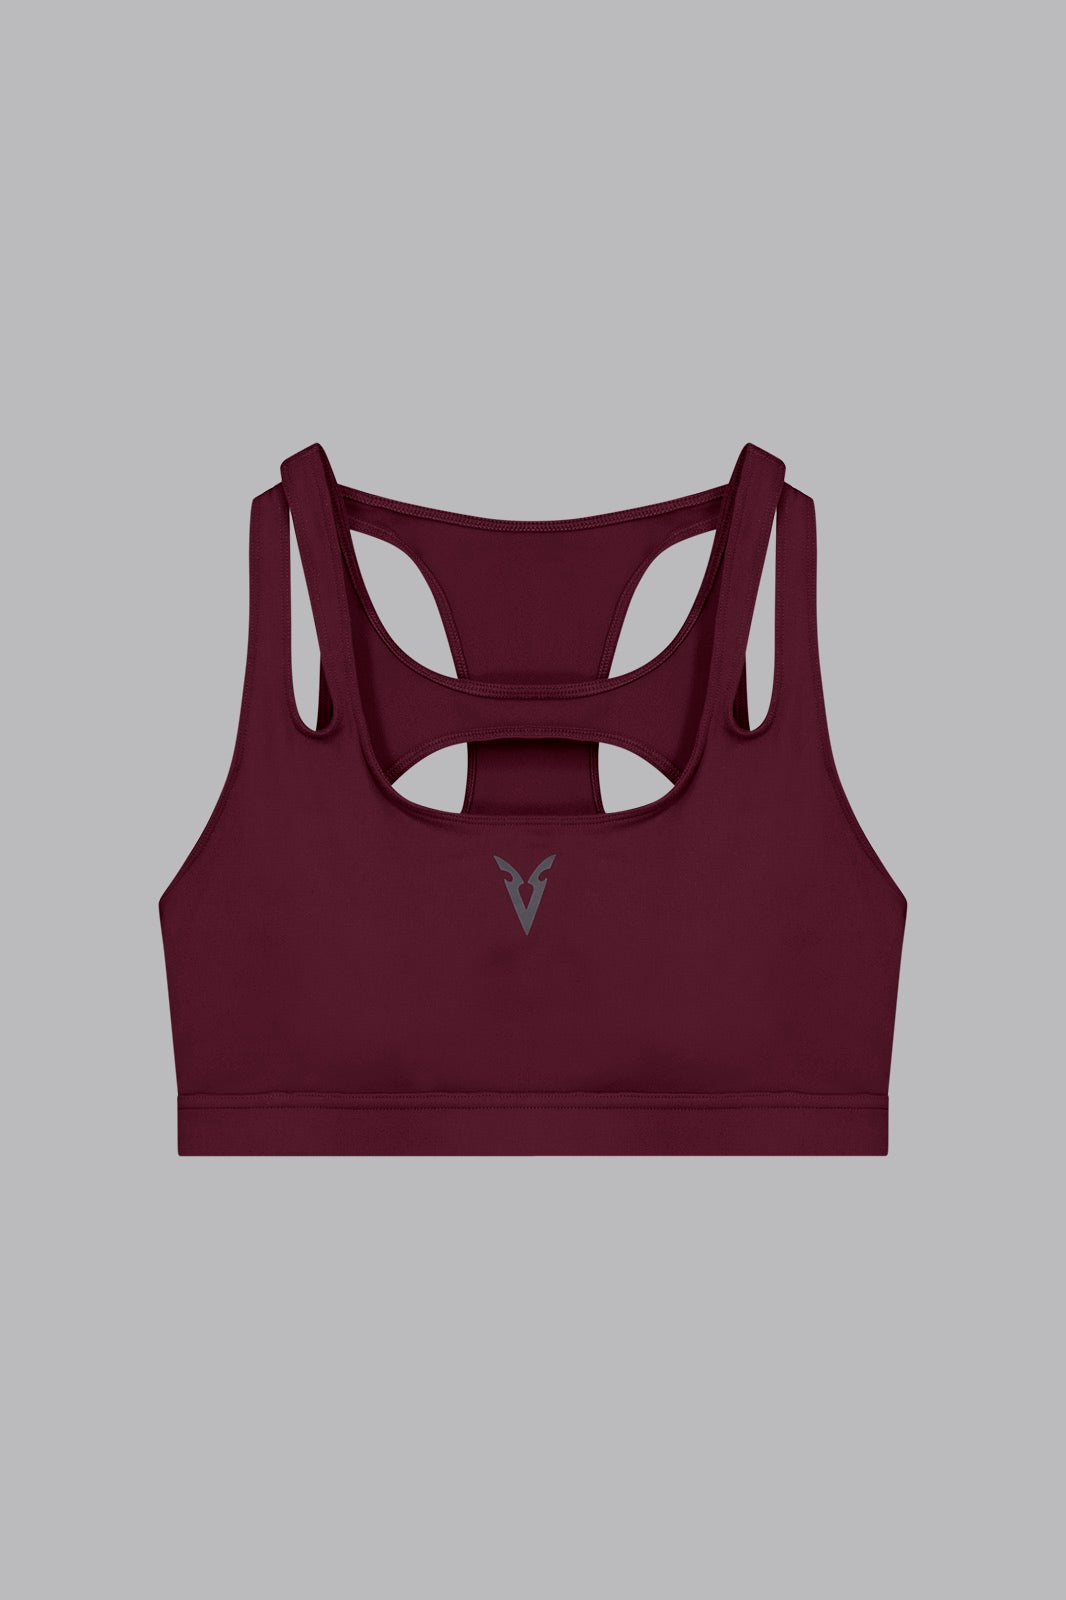 Cut Out Bra - Maroon Sports Bra with Front Cut Out - Maroon Sports